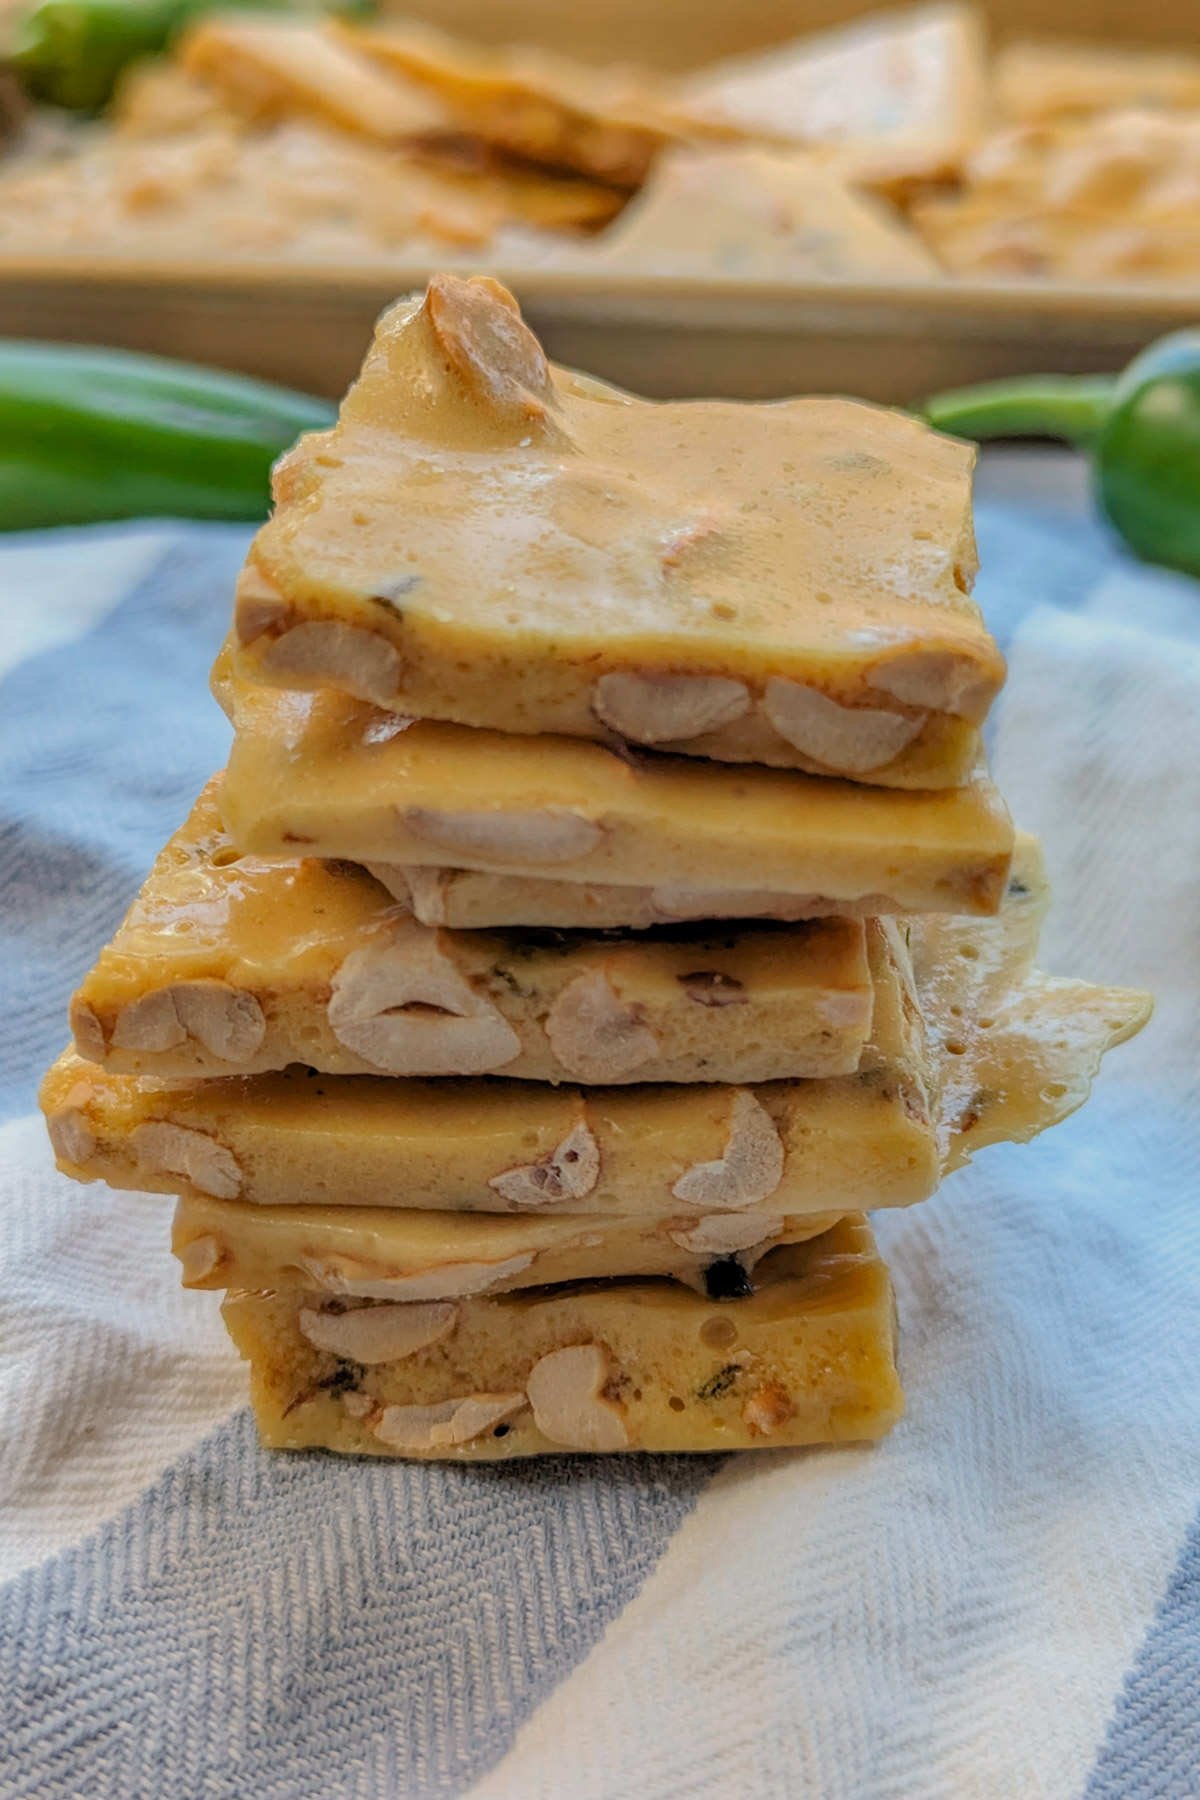 Jalapeno Peanut Brittle stacked on each other.